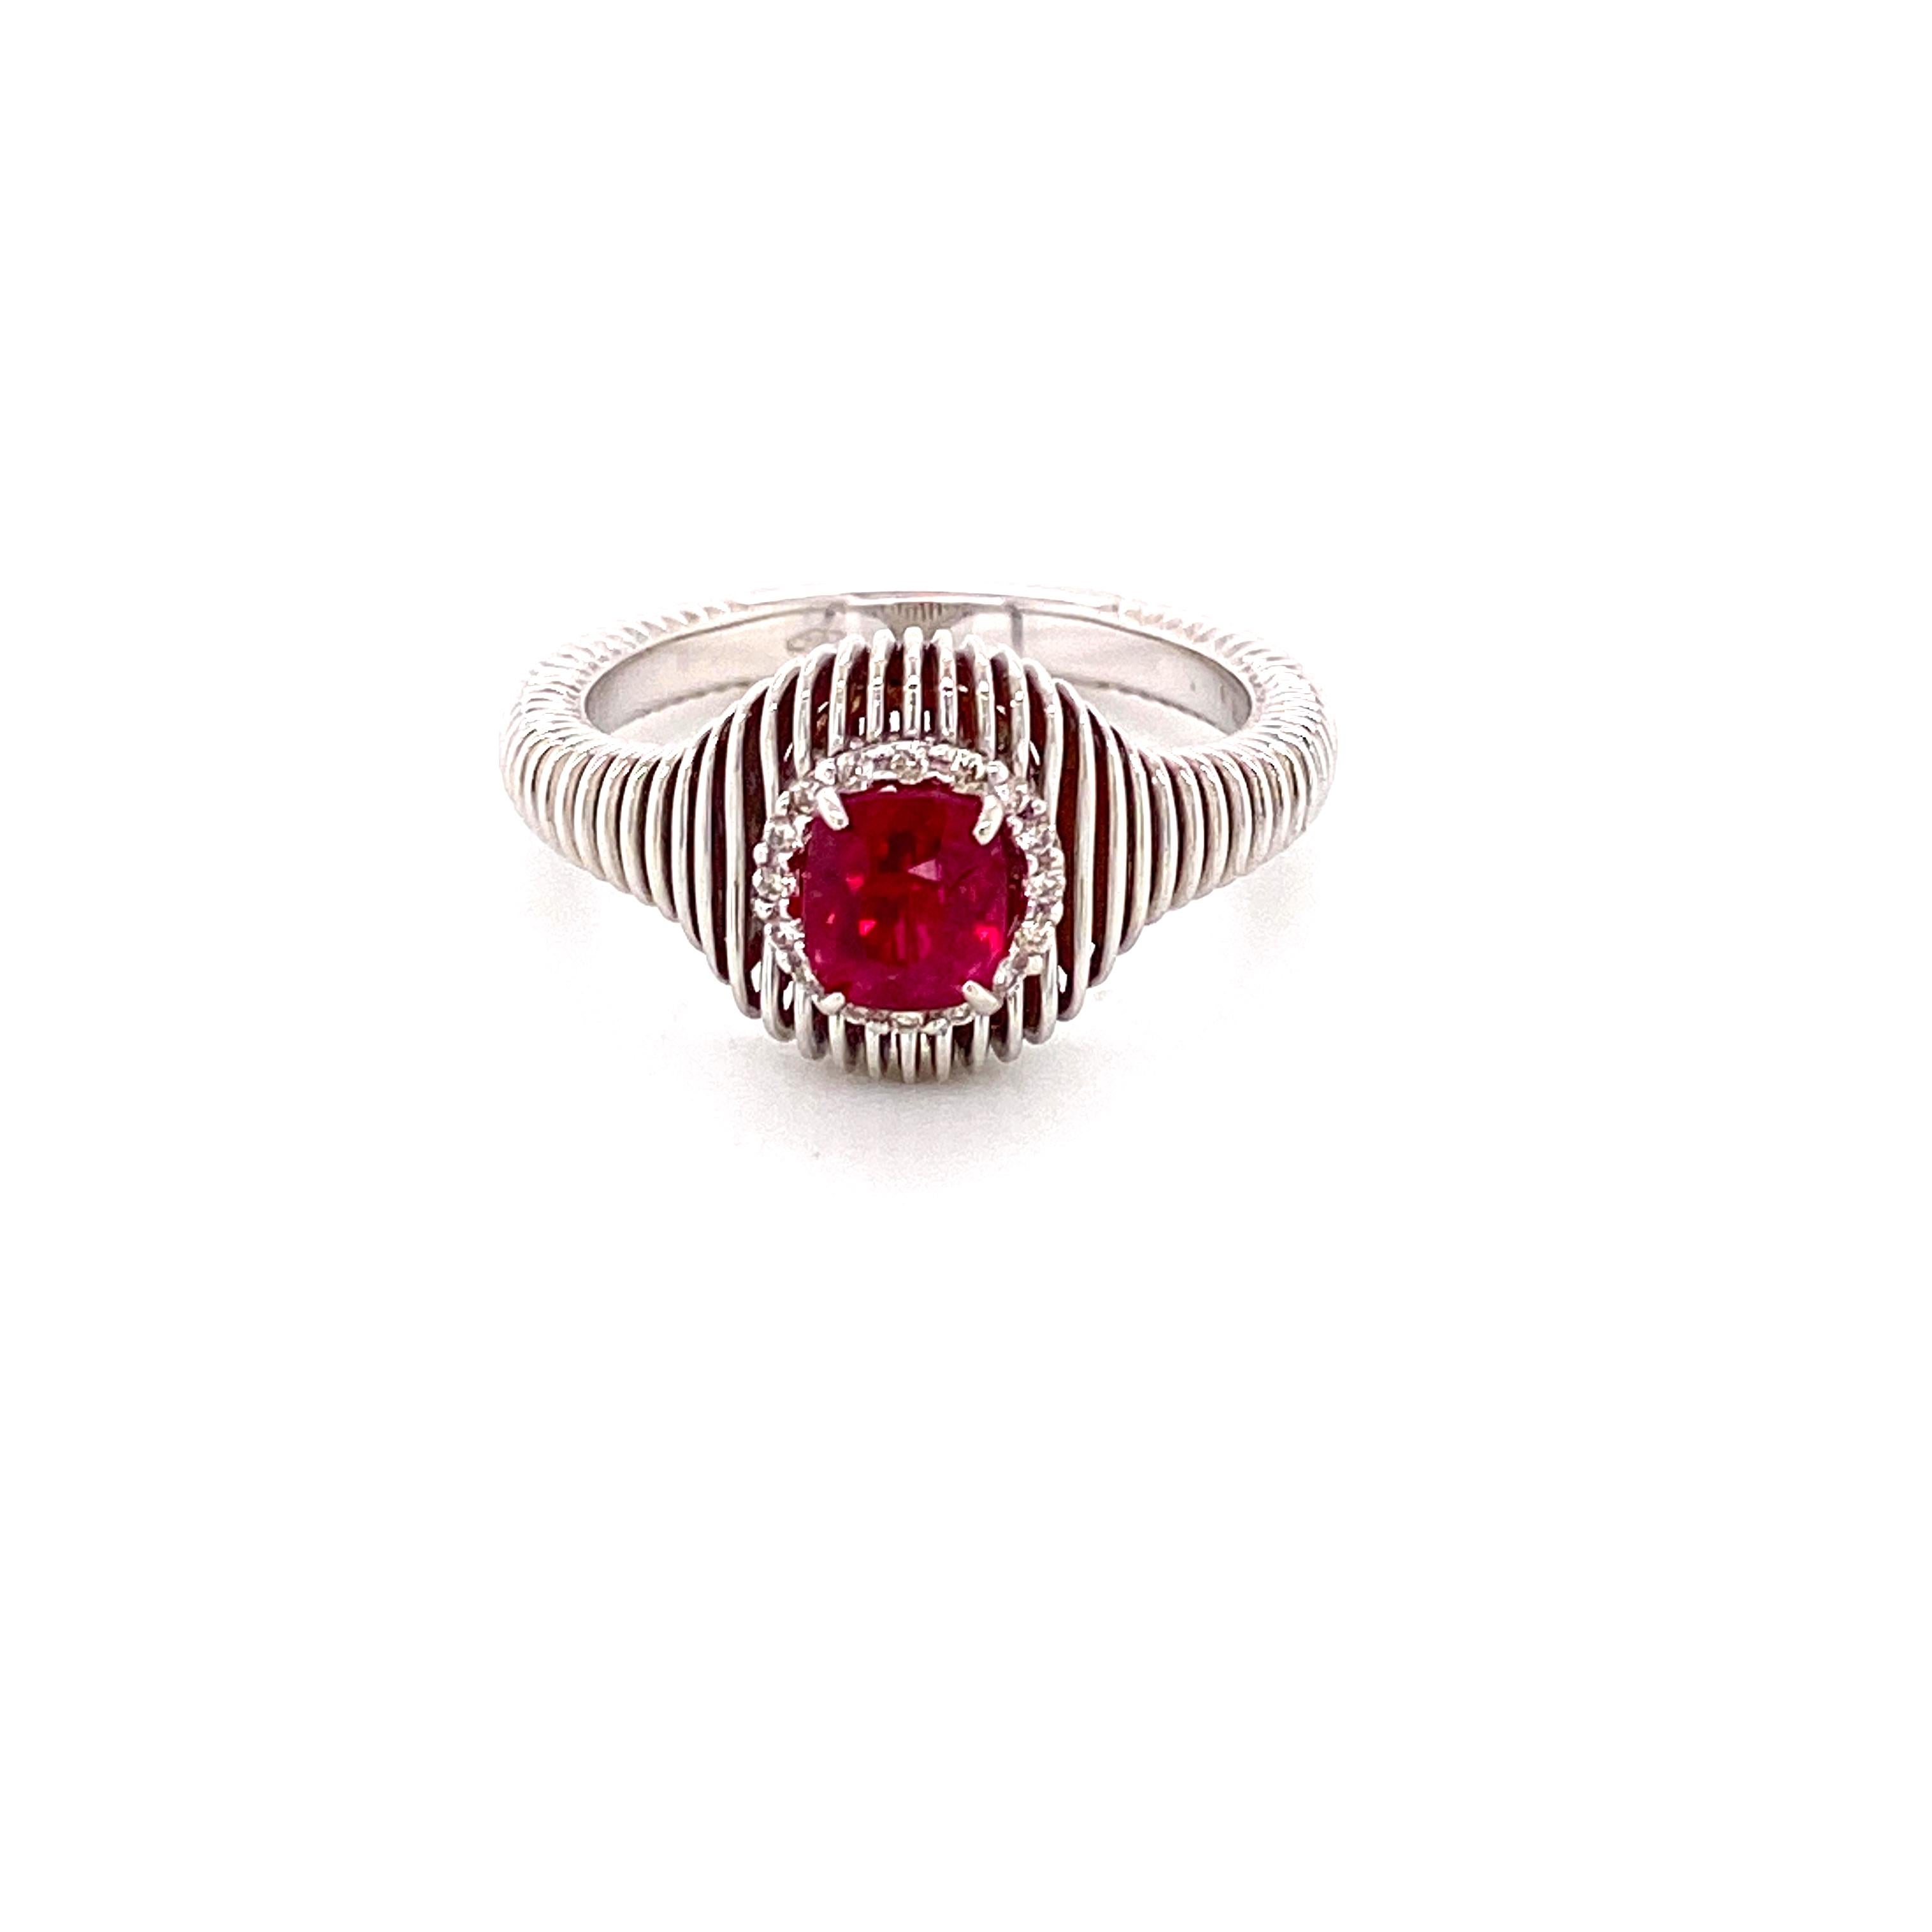 0.92 Carat No Heat Vivid Red  Burma Spinel and White Diamond Gold Engagement Ring:

An elegant ring, it features a gorgeous 0.92 carat vivid red Burmese spinel, surrounded by white round brilliant diamonds weighing 0.08 carat. The spinel, hailing